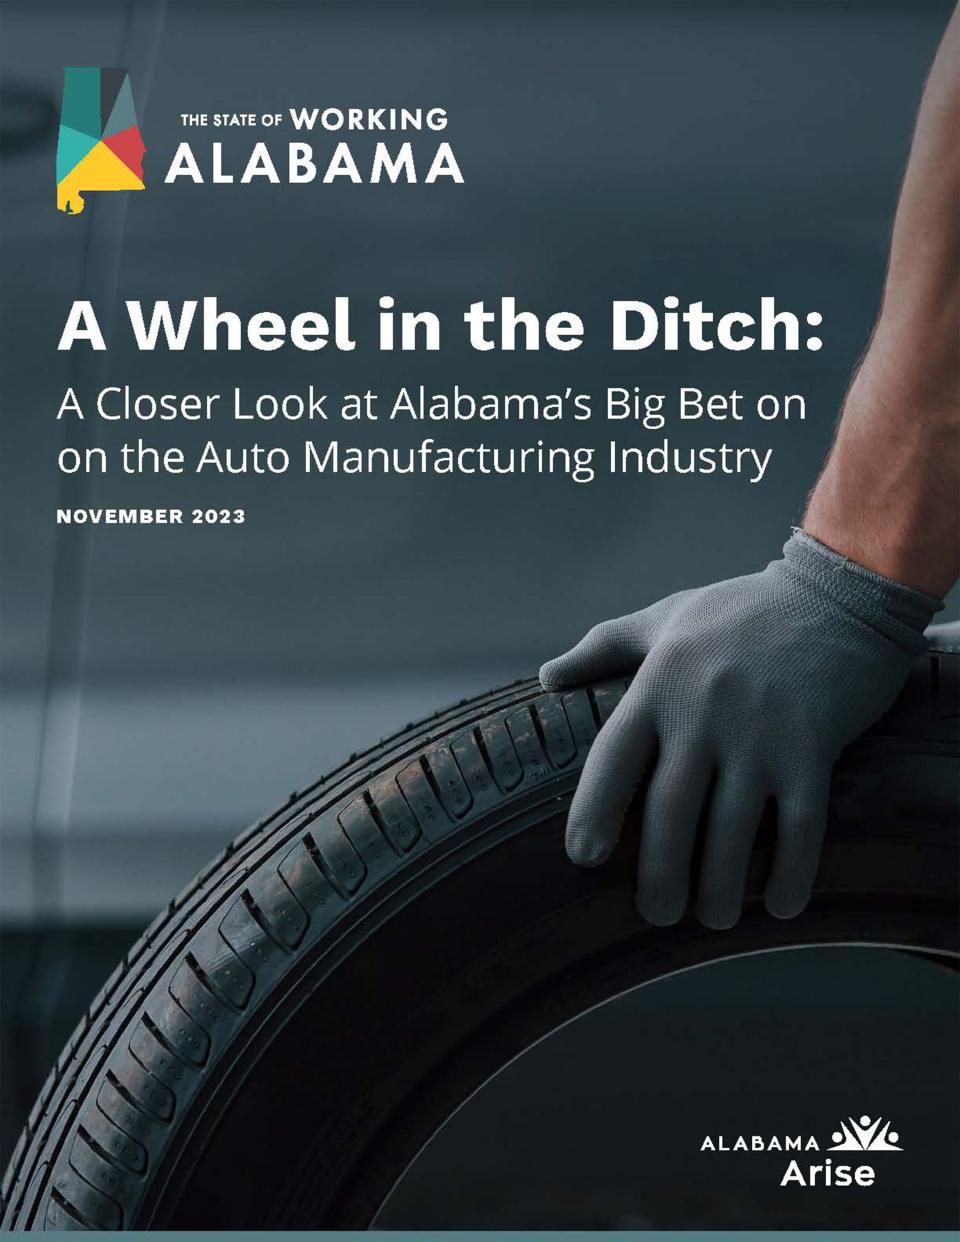 Alabama Arise has released a new report on the state's auto industry.